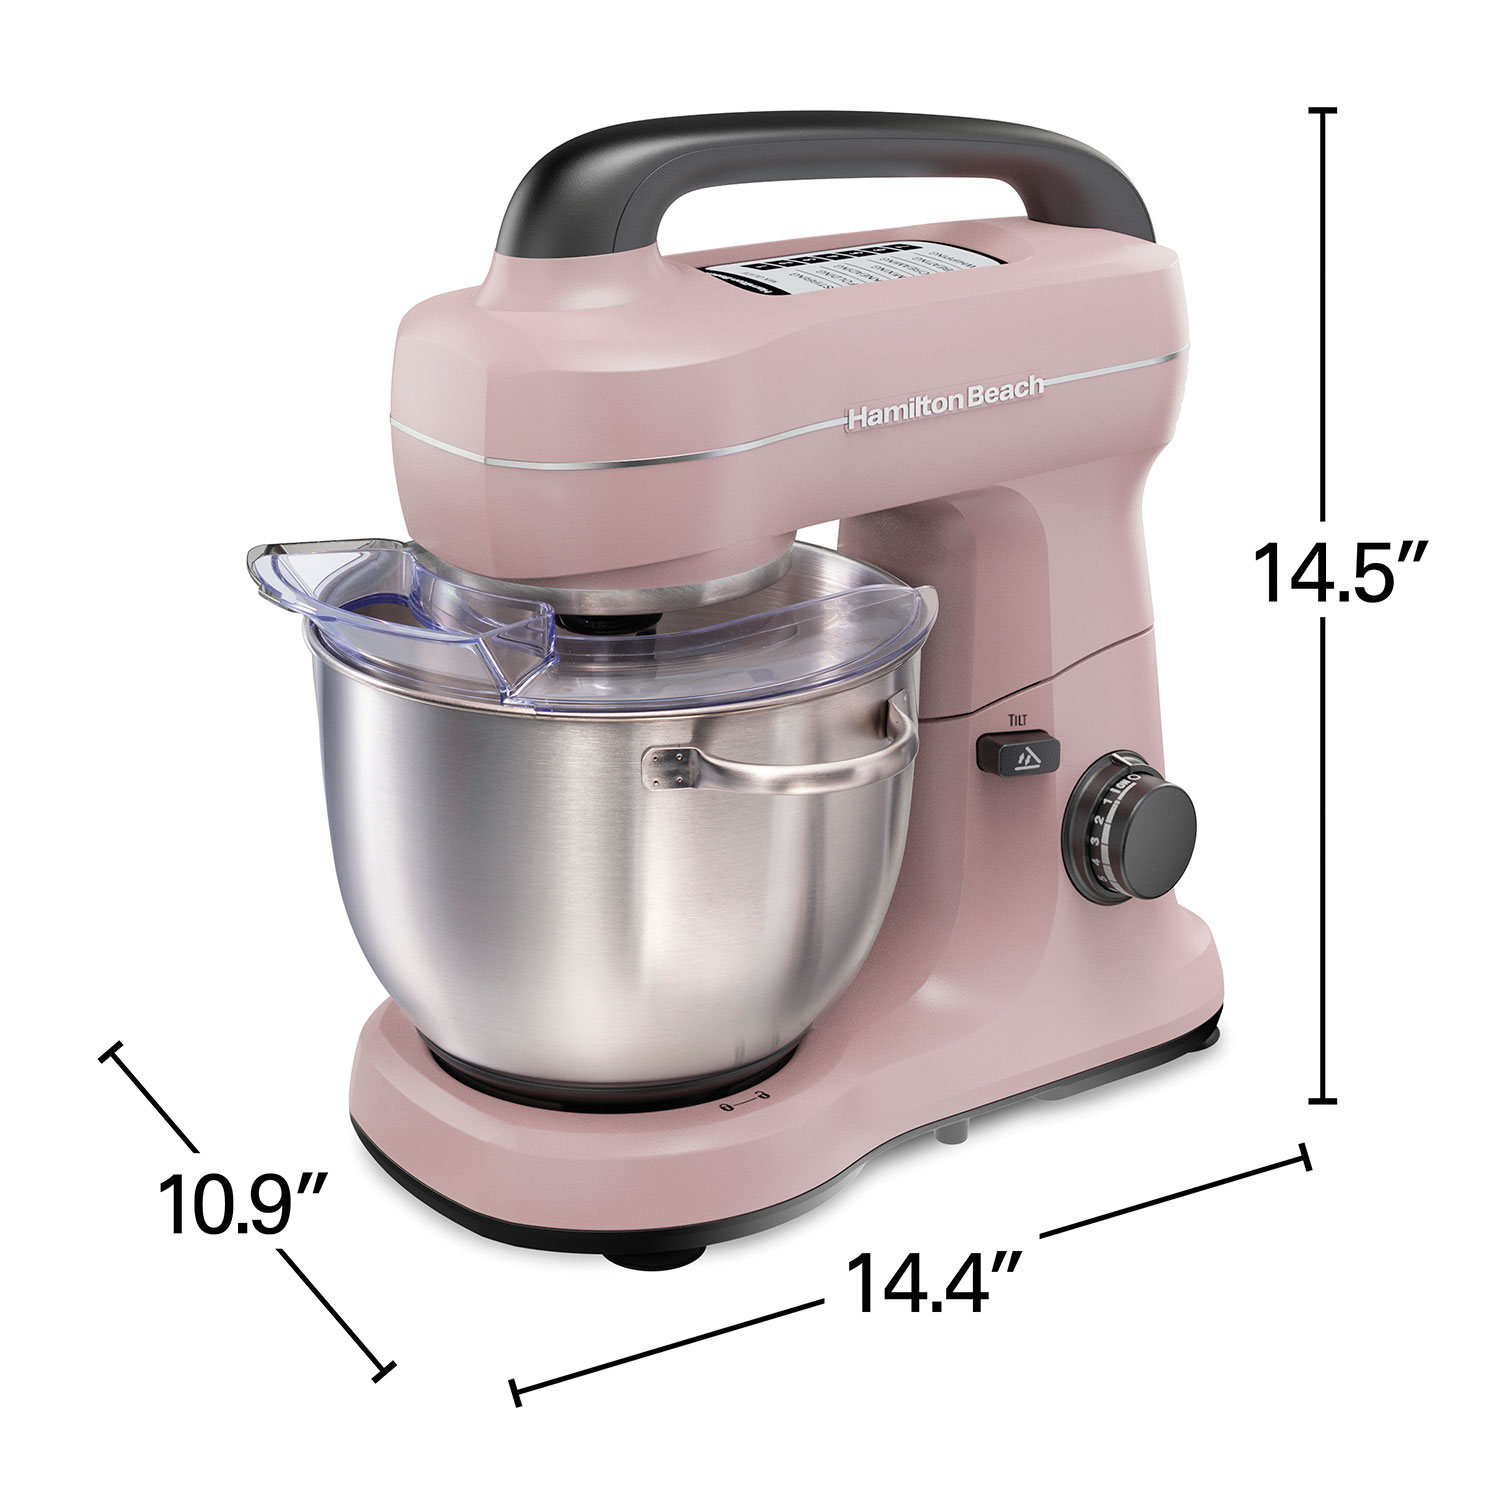 Hamilton Beach® Stand Mixer with 4 Quart Stainless Steel Bowl 7